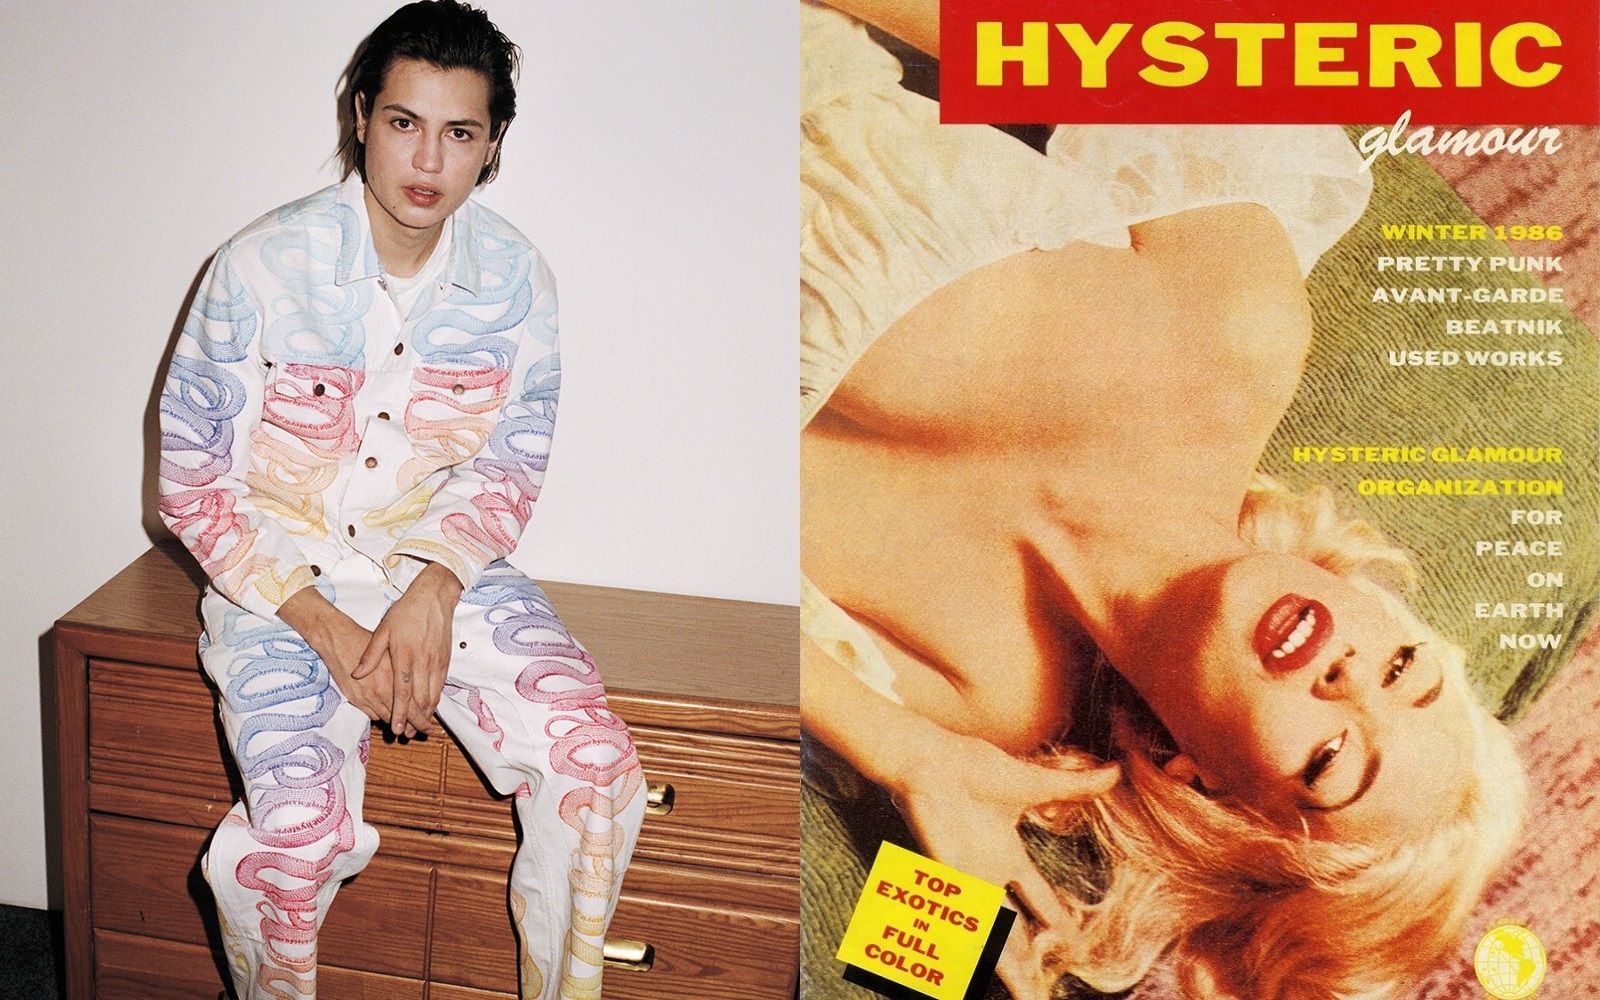 The history and the aesthetics of Hysteric Glamour